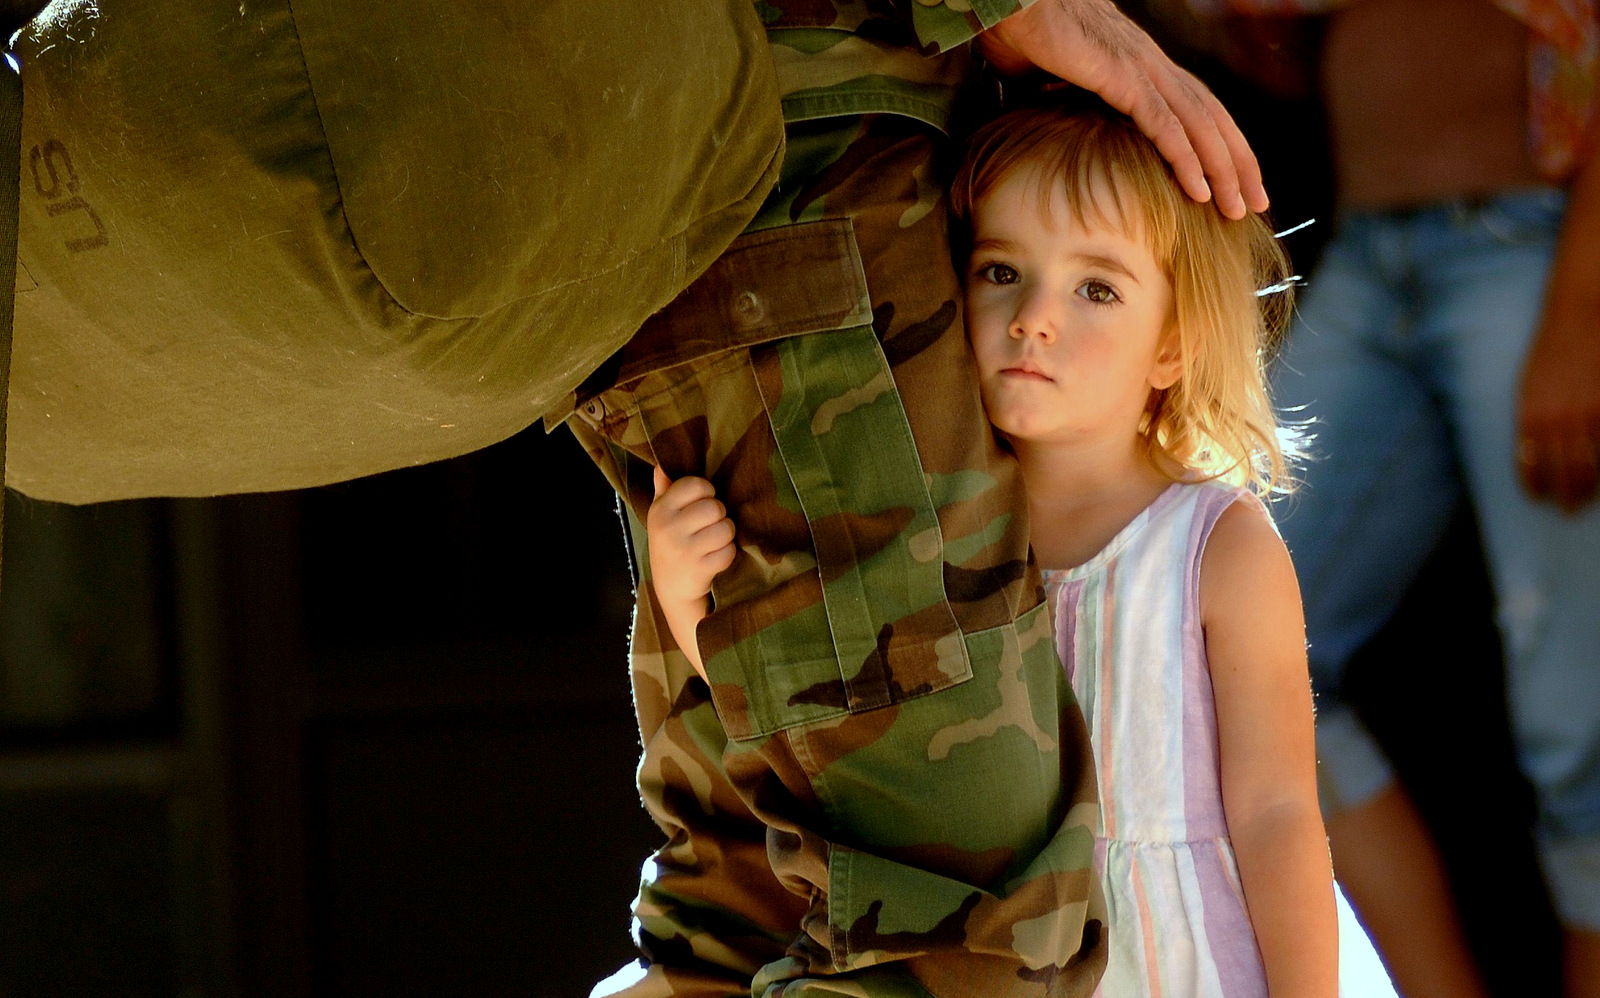 The U.S. Military's Child Sex Abuse Problem